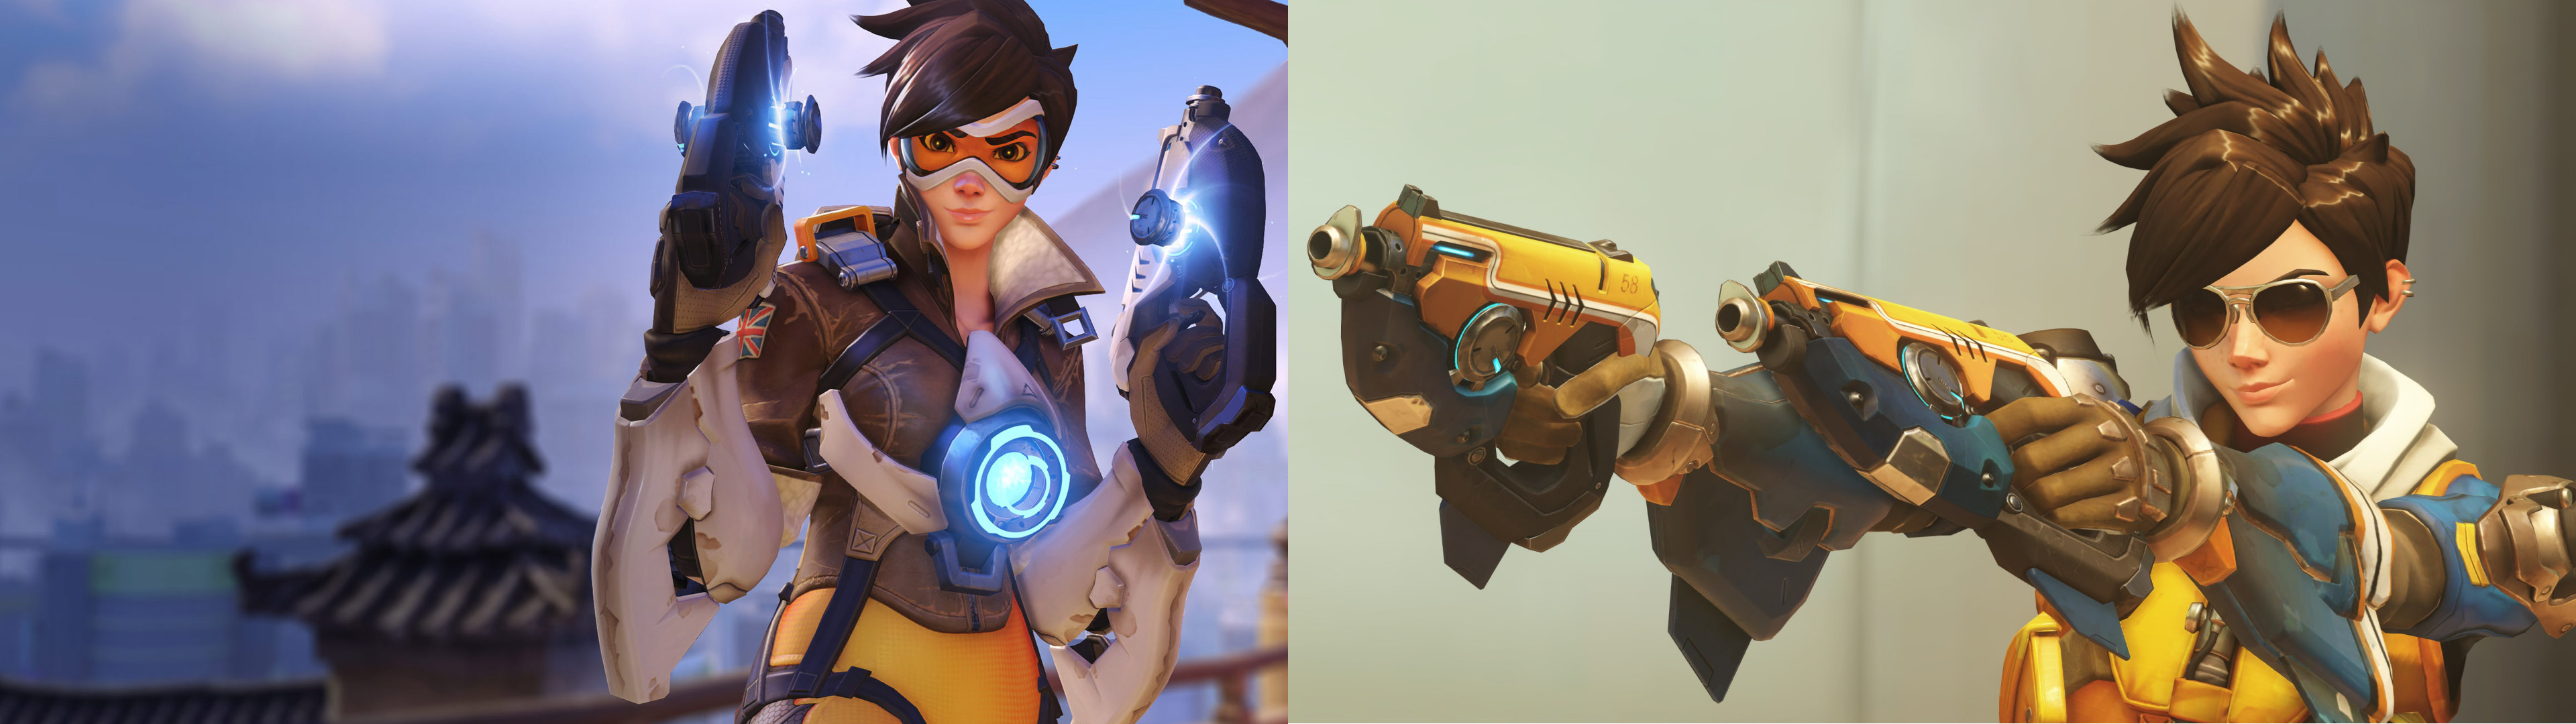 3840x1080 Overwatch Tracer Dual Monitor Wallpaper 